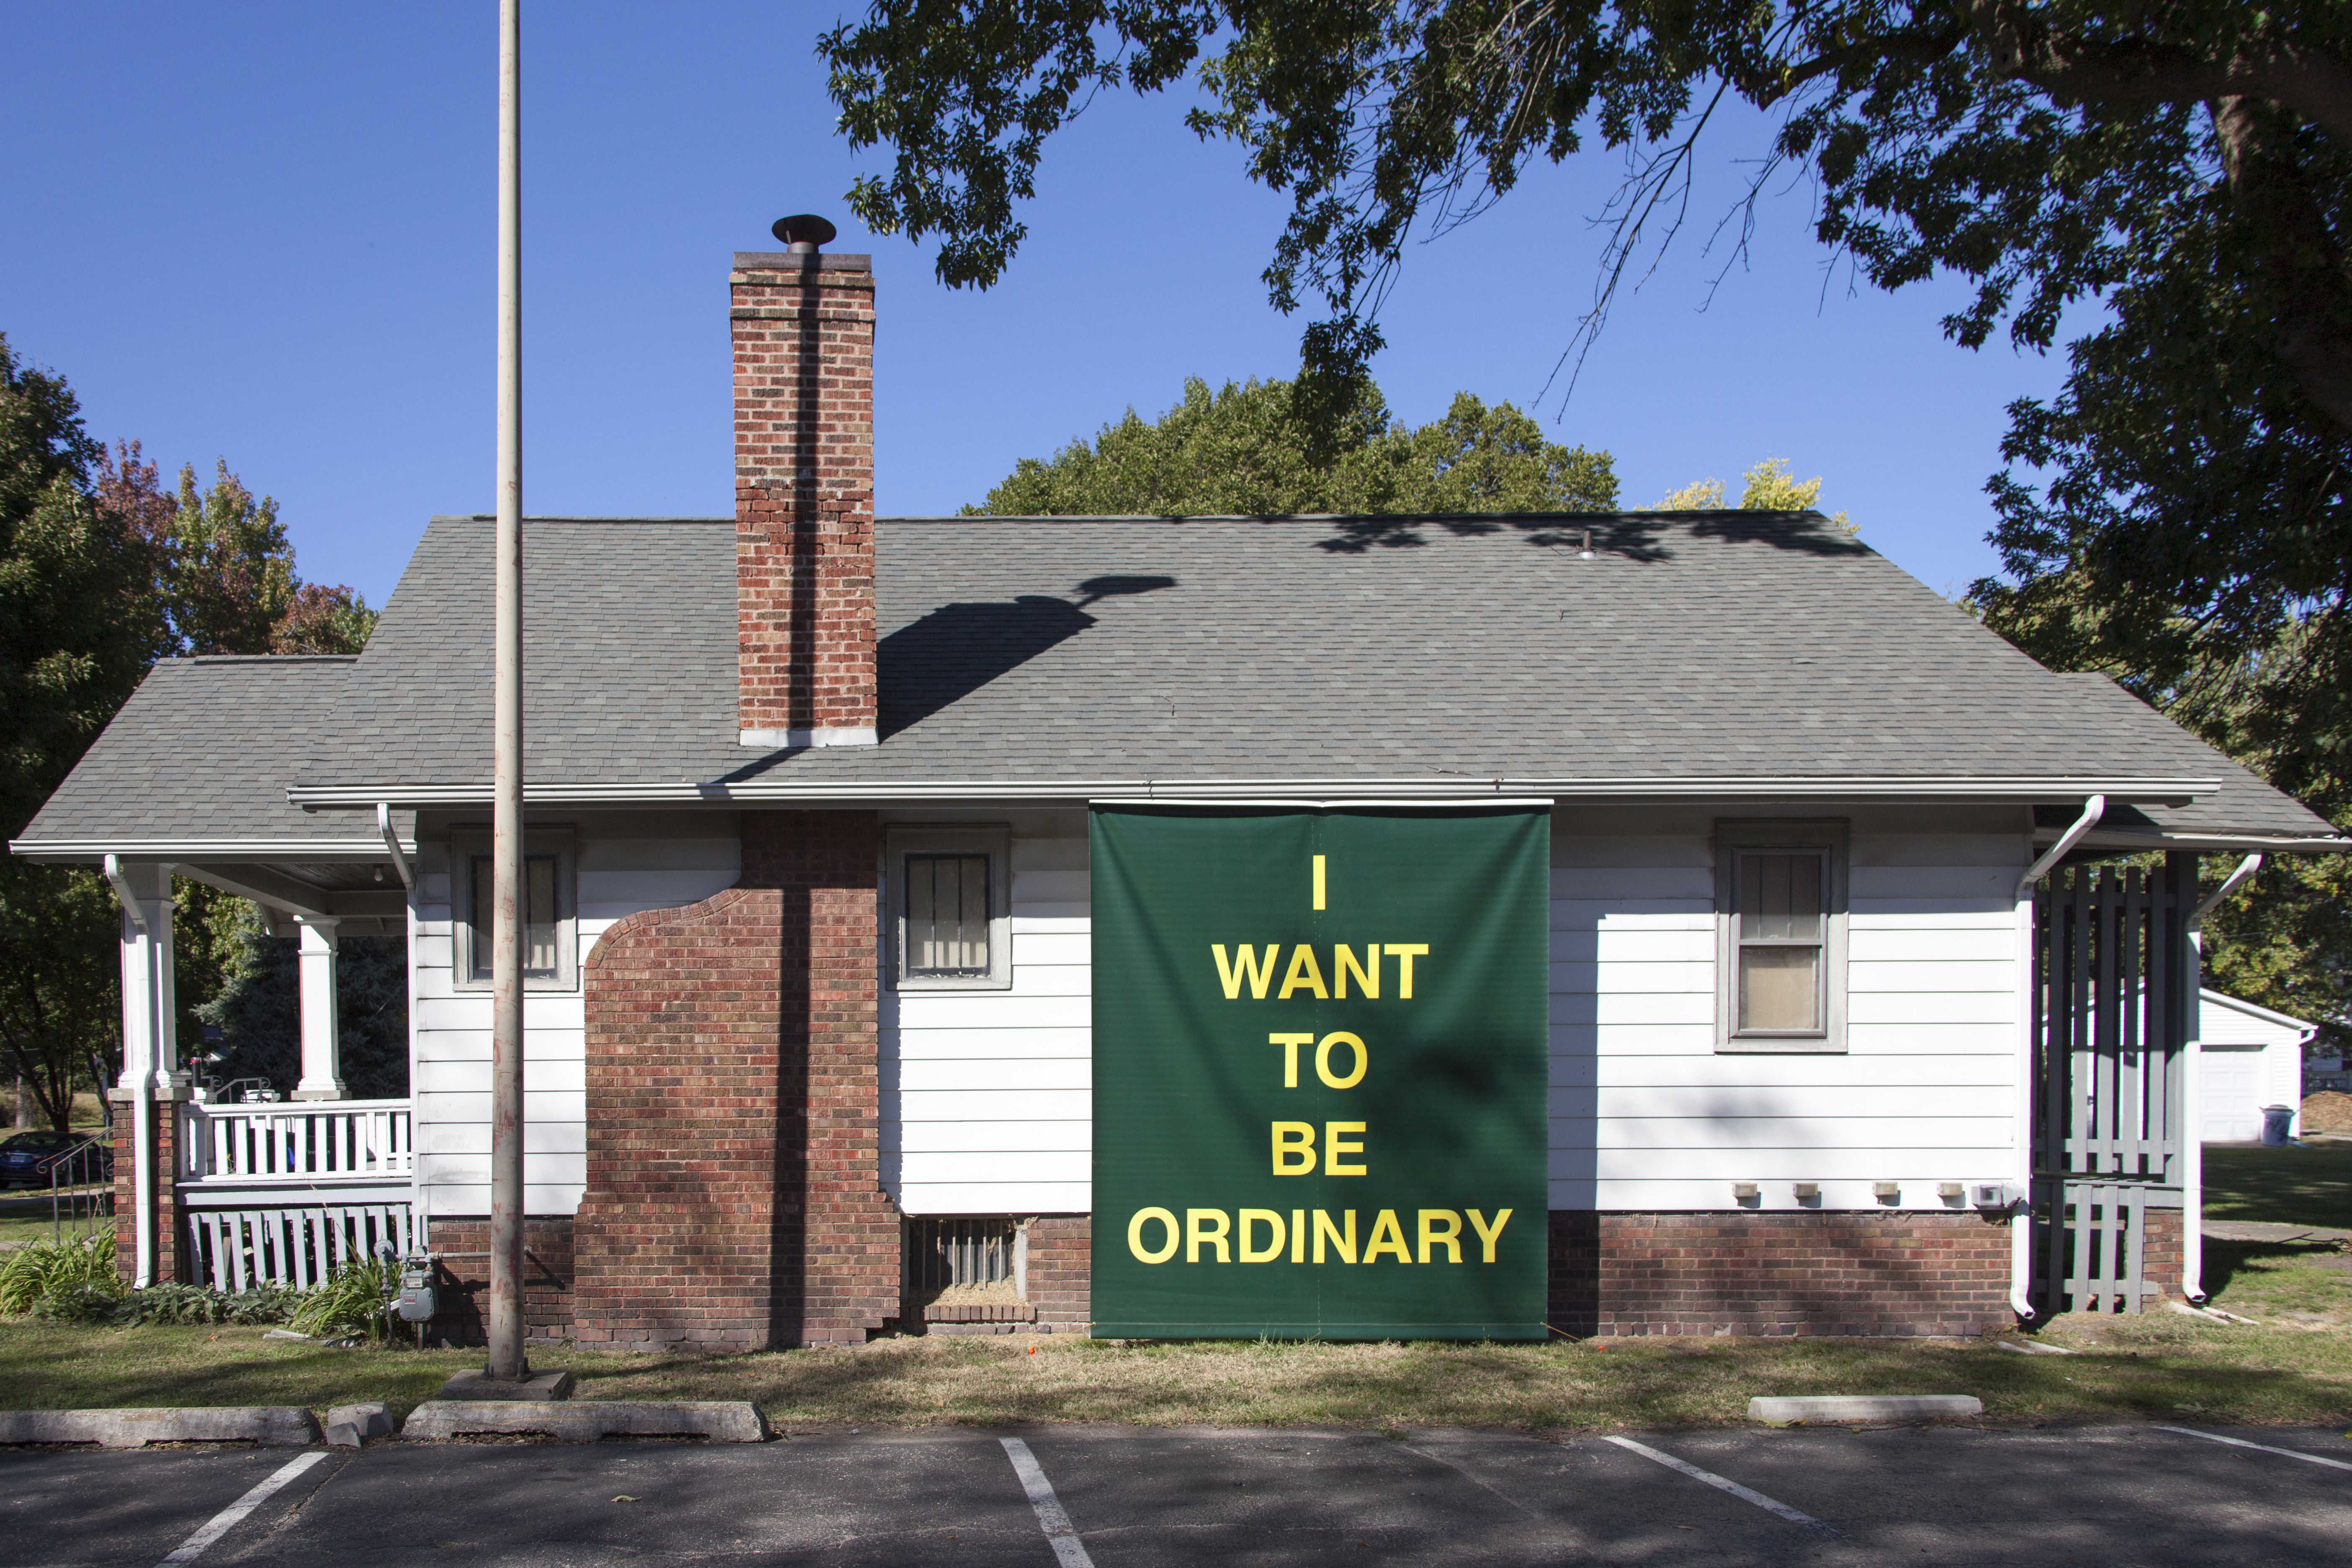 Industry of the Ordinary. “Prayer (for Springfield),” 2016. Exterior installation view. DEMO Project, Springfield, Illinois. Photo courtesy of DEMO Project.